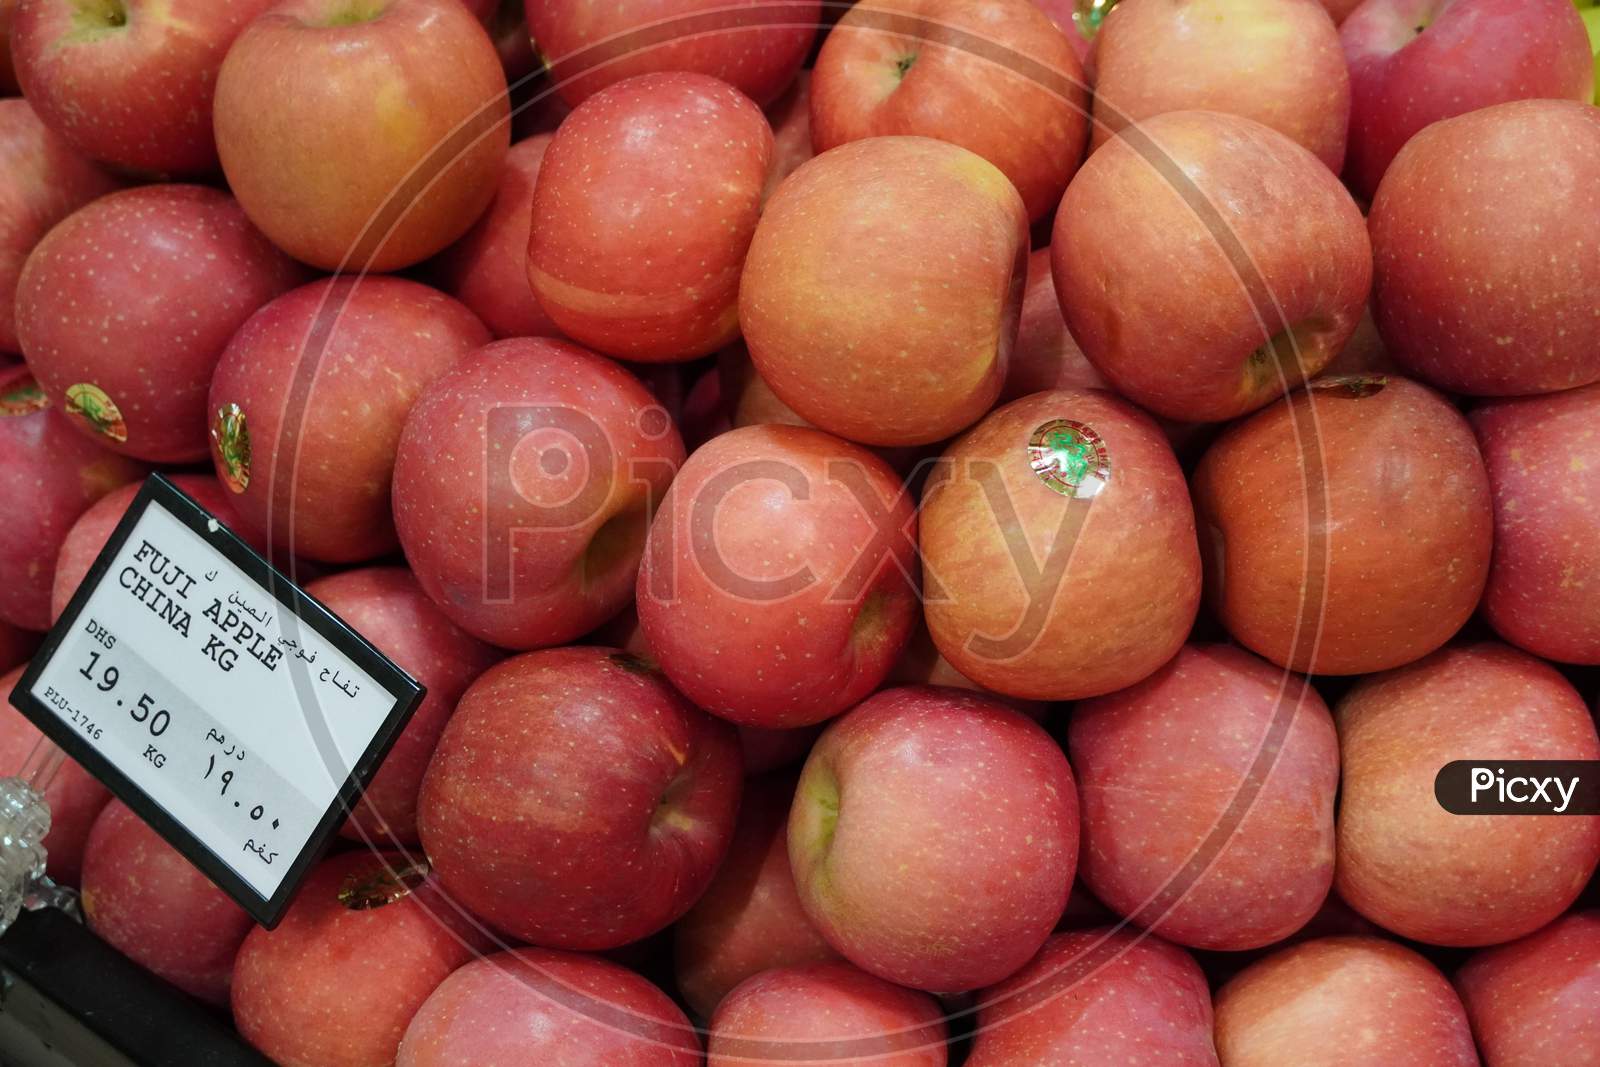 Dubai Uae - November 2019: Bunch Of Pink Apples On Boxes In Supermarket. Apple Put On Sale Shelves In The Supermarket. Fresh Ripe Apples Displayed Beautifully.